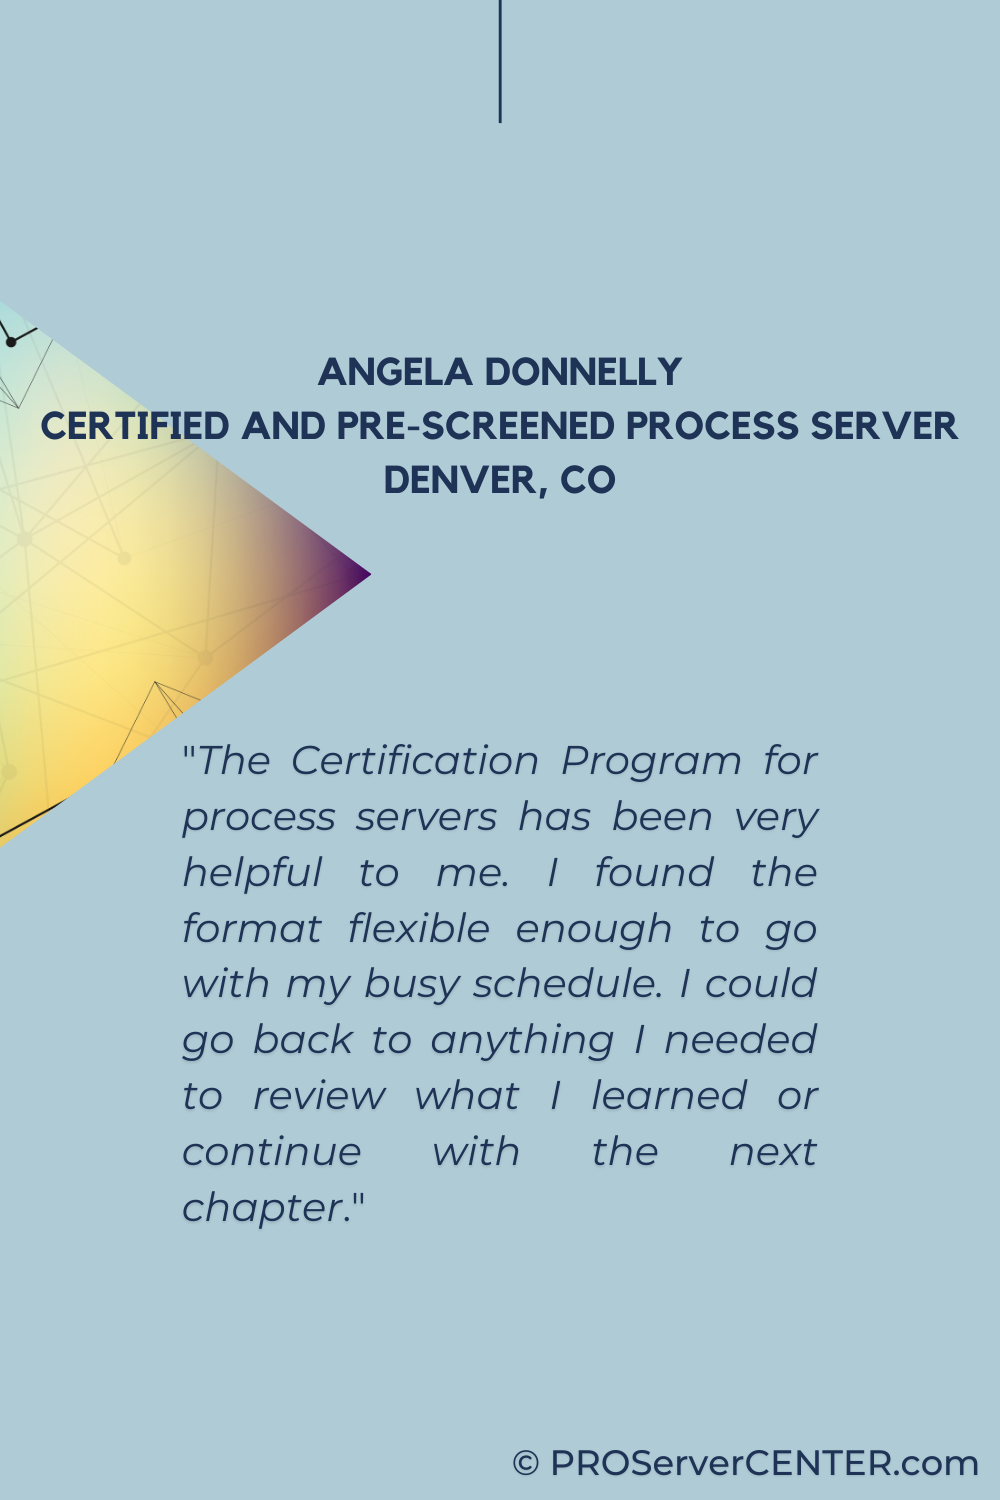 donnelly, certified and pre-screened process server